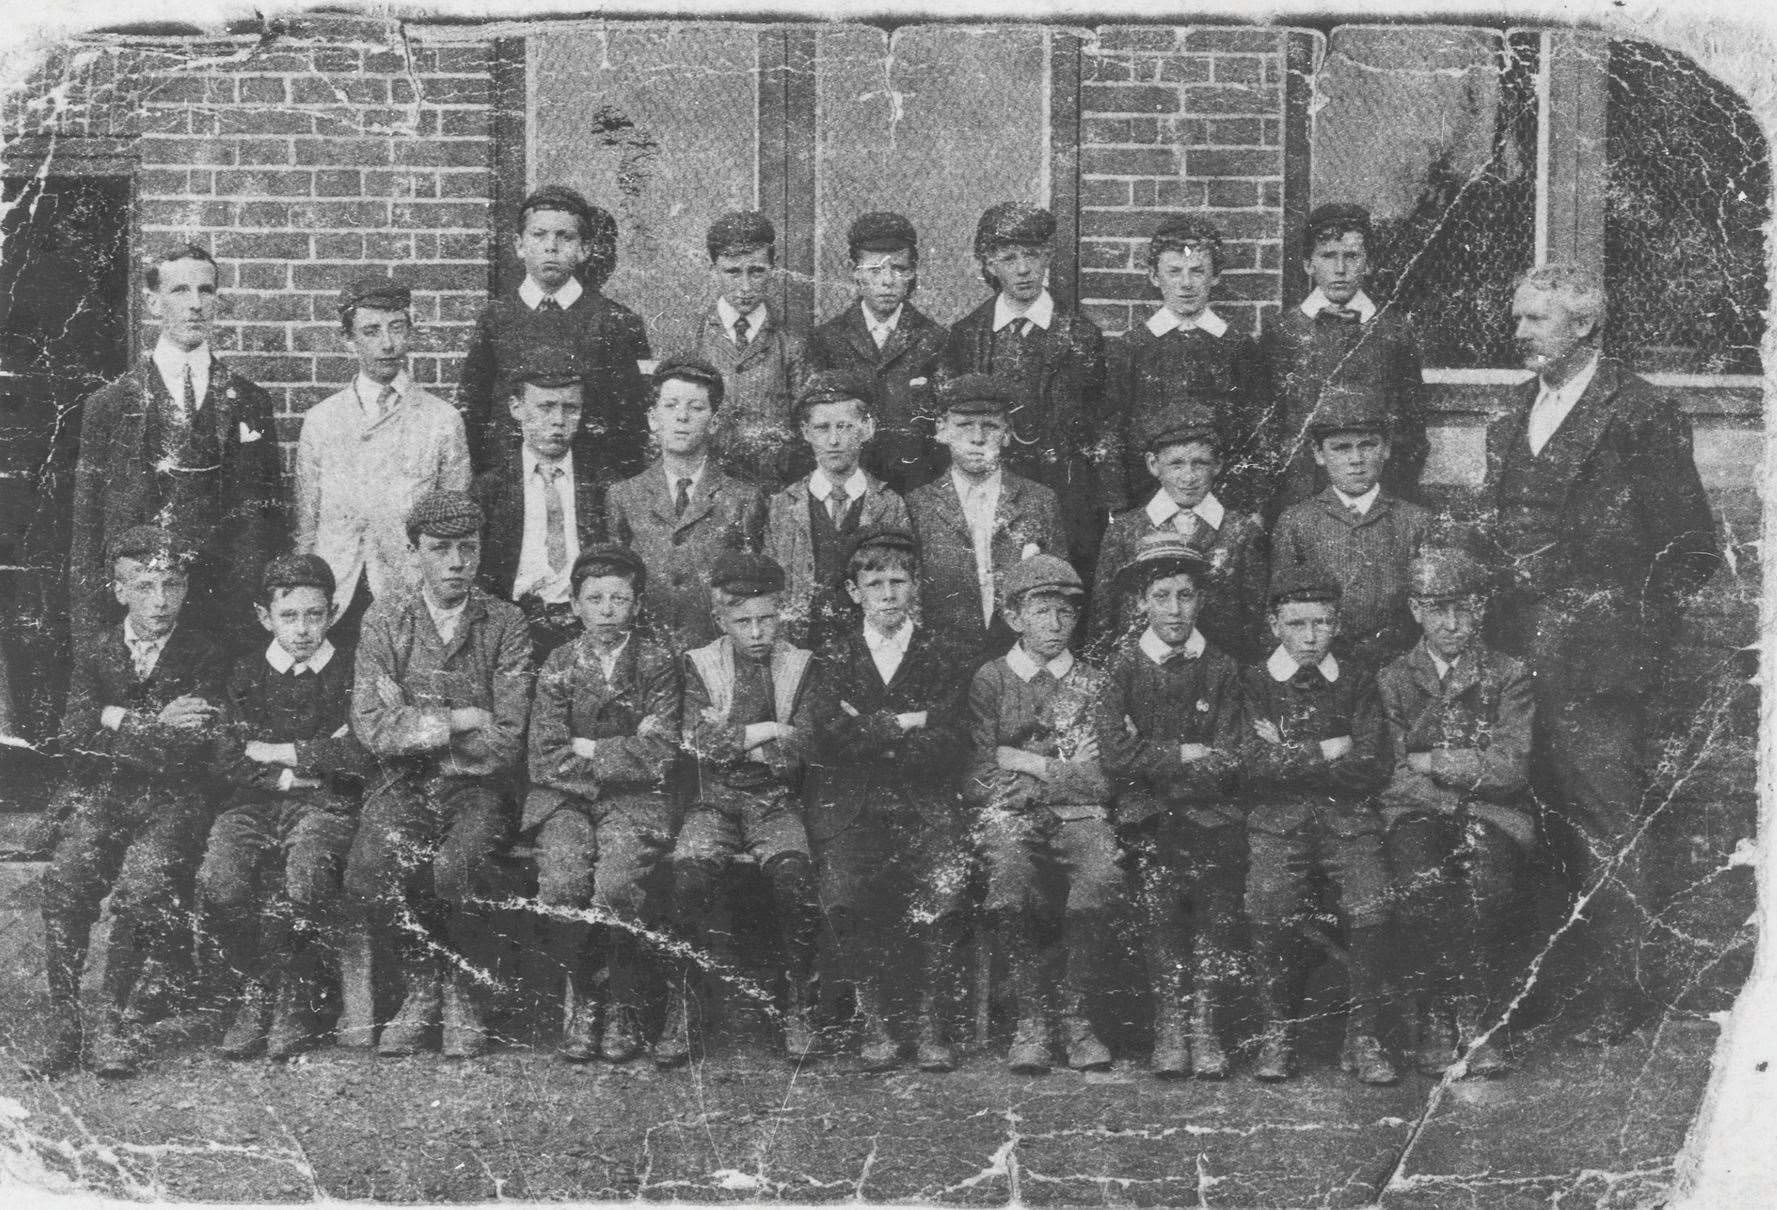 A Dunks school photo from the early 1900s. William and Reginald Rootes are among the pupils